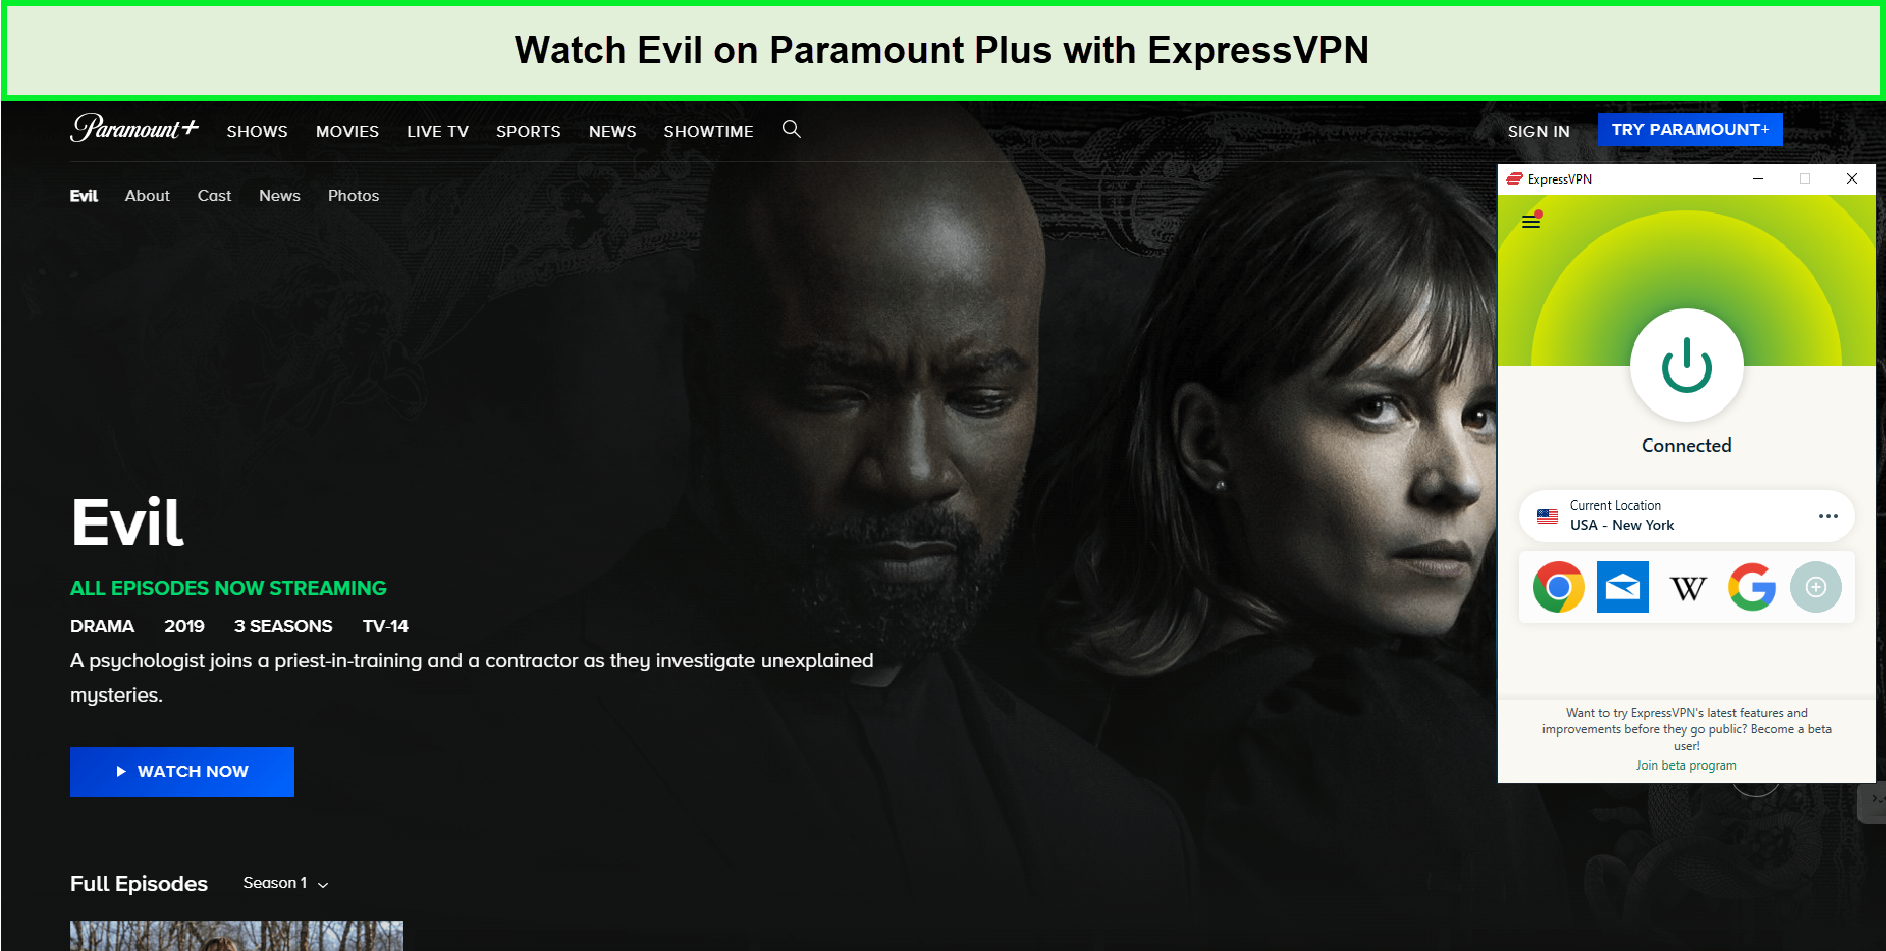 Watch-Evil-All-Seasons-in-UK-on-Paramount-Plus-with-ExpressVPN